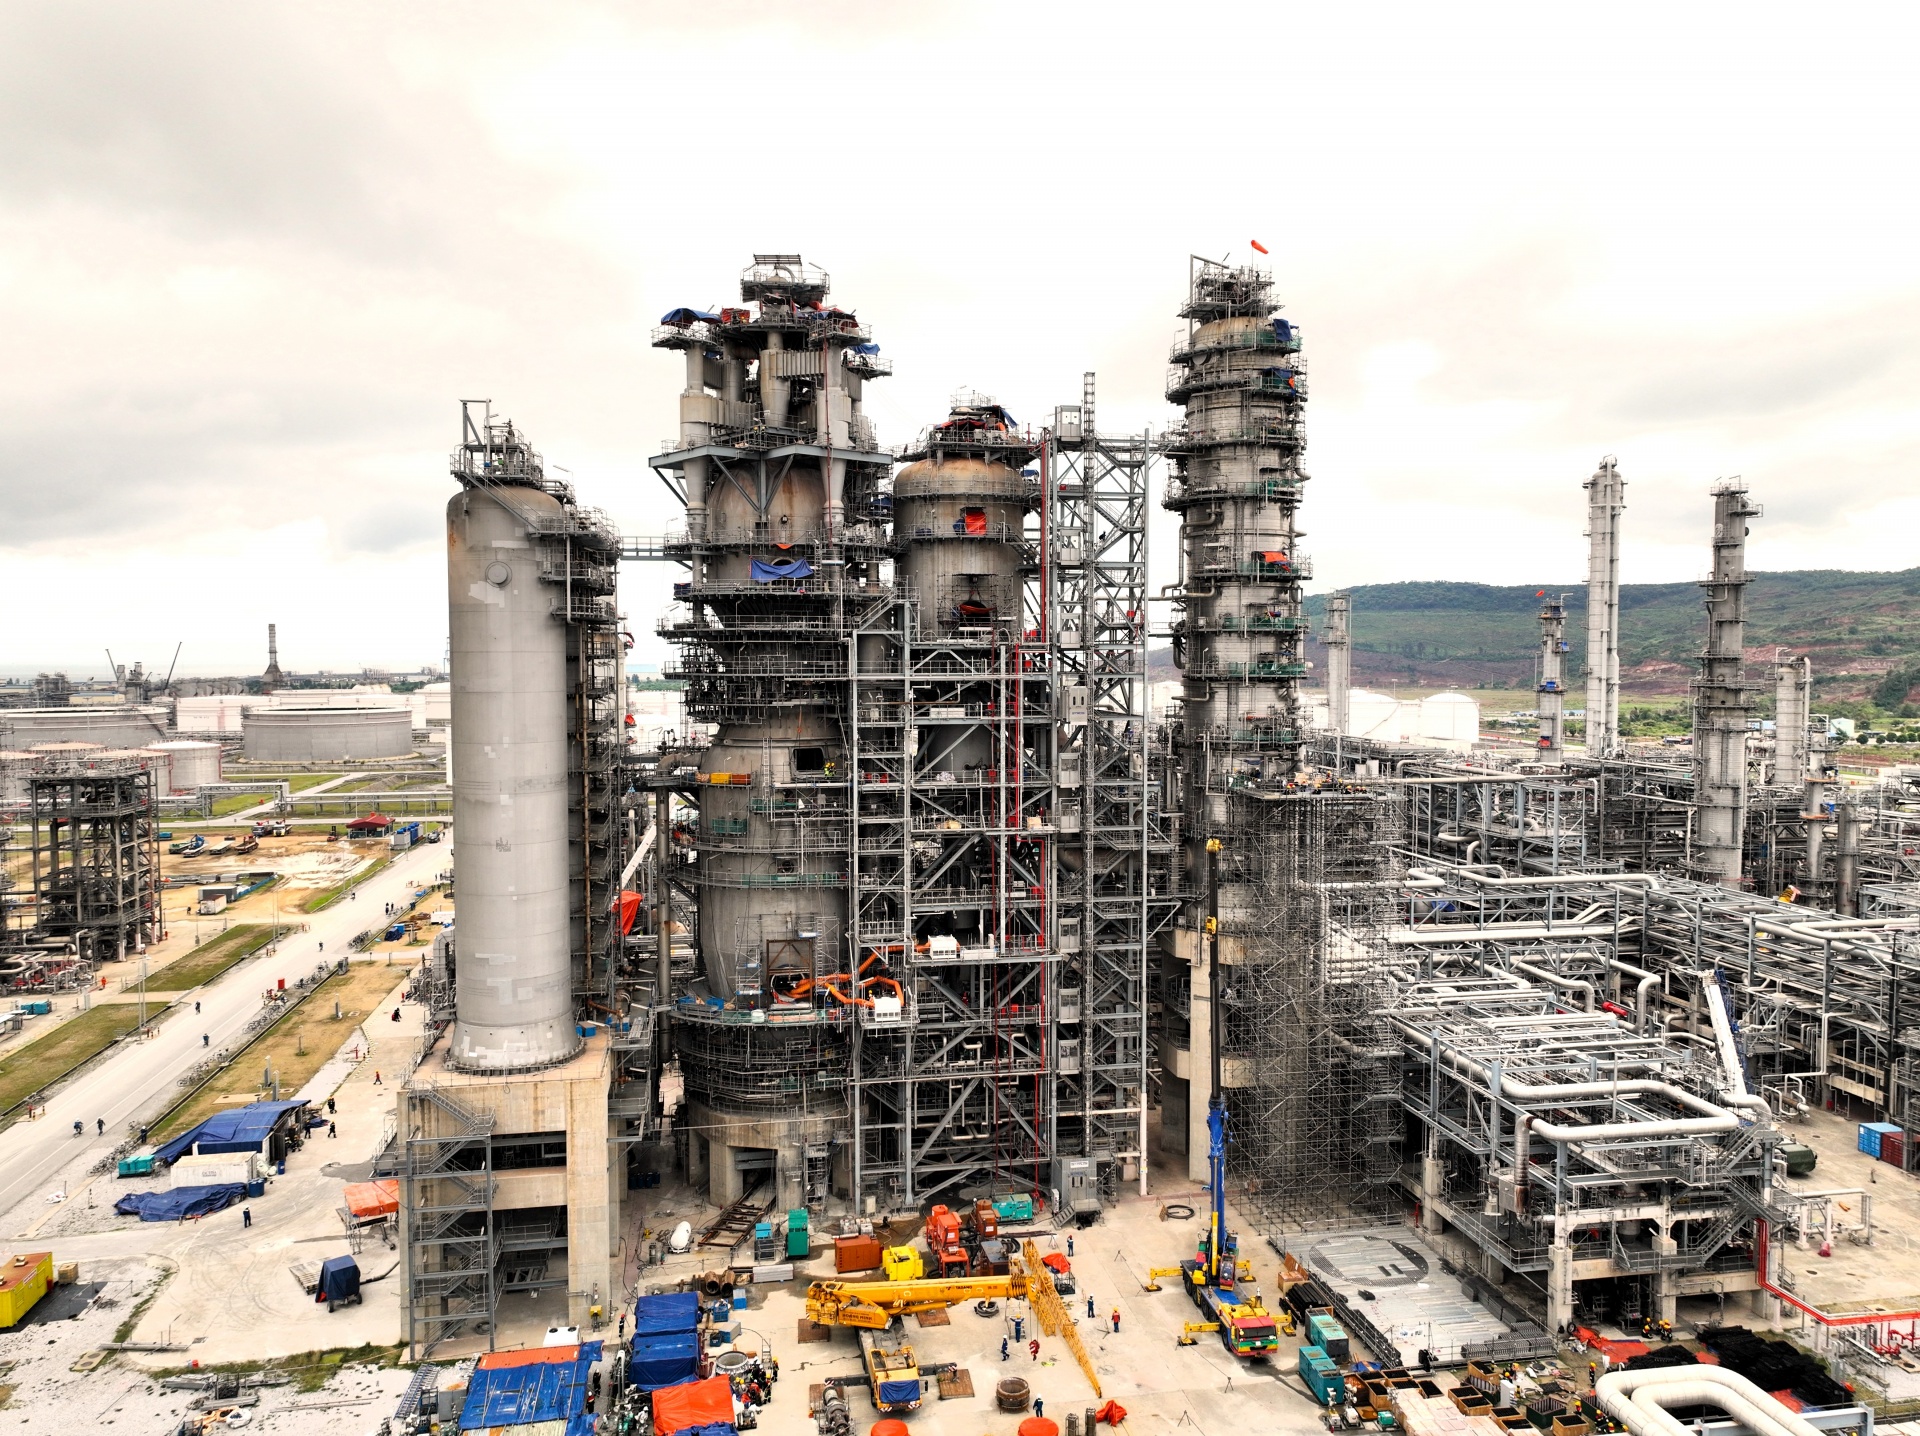 Nghi Son Refinery and Petrochemical on schedule